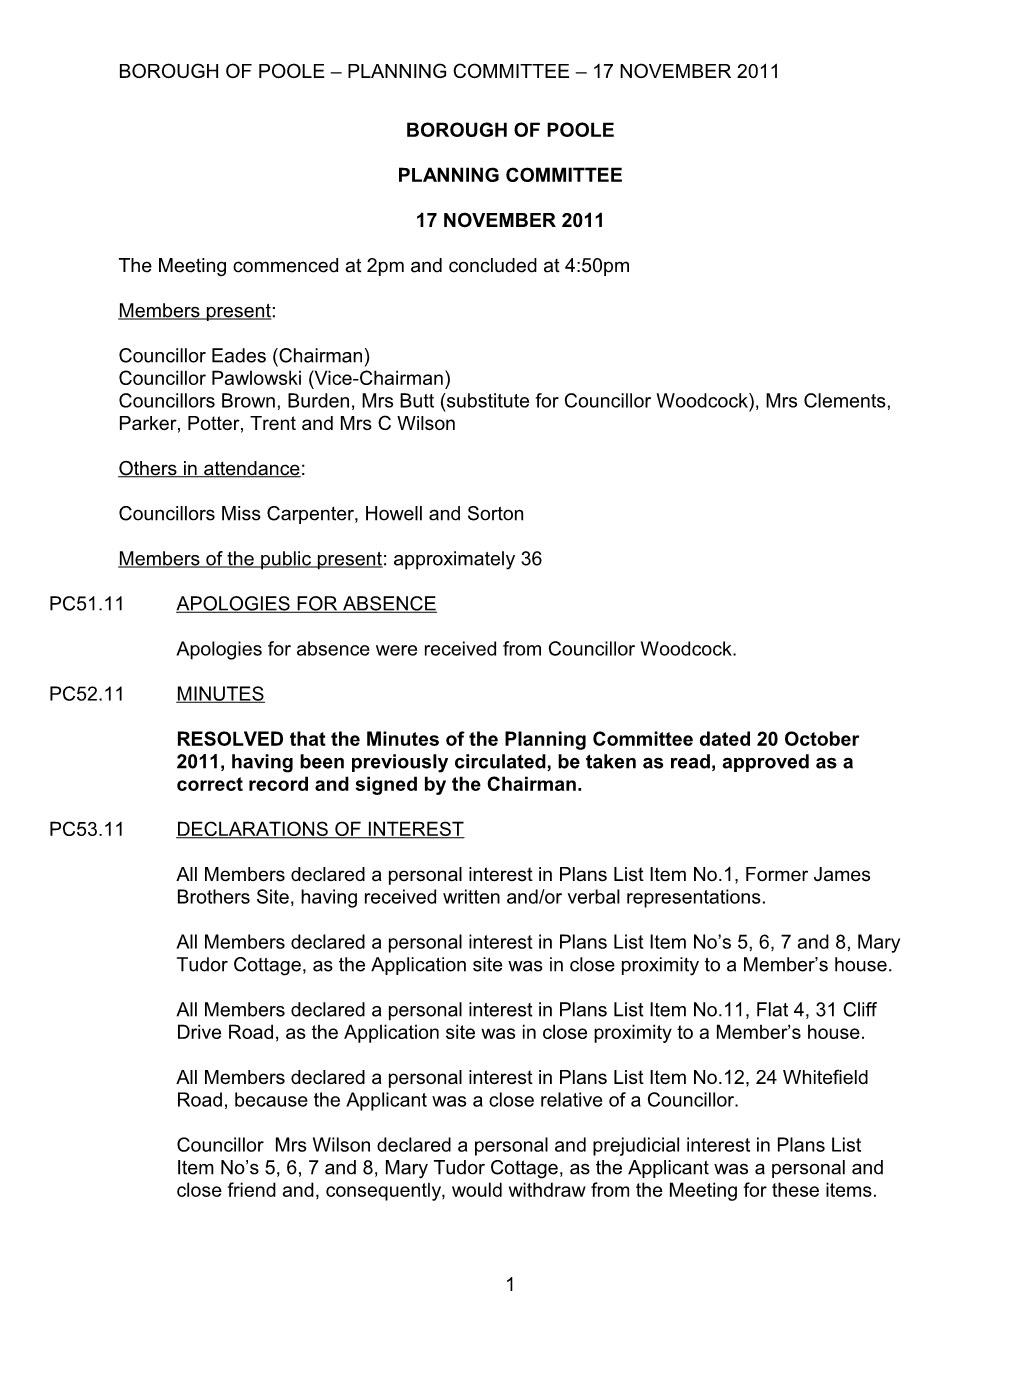 Borough of Poole Planning Committee 17 November 2011